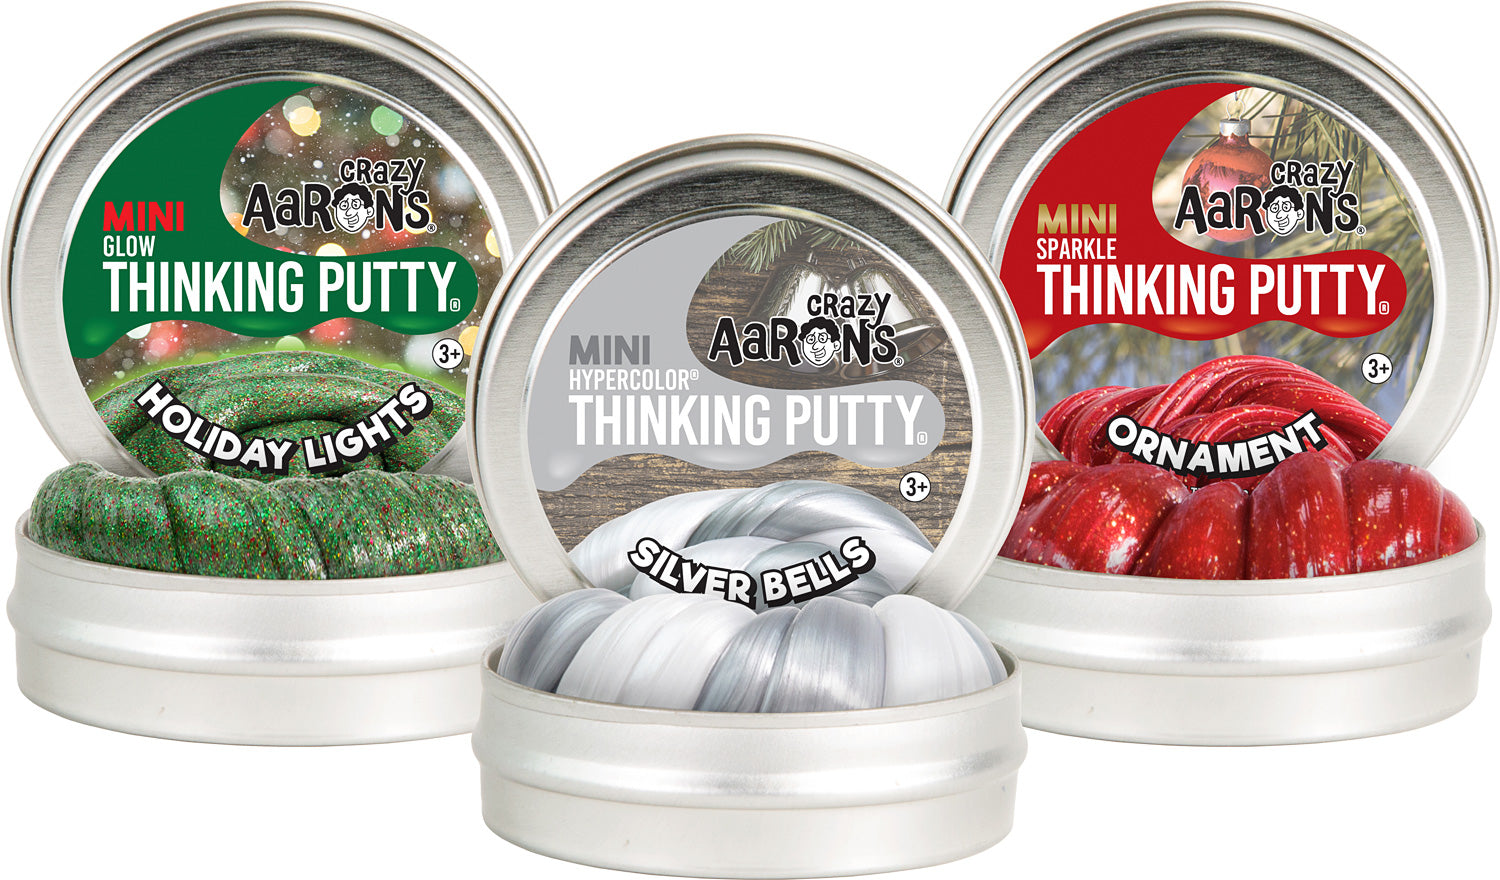 Holiday Lights 2&quot; Glow-in-the-Dark Thinking Putty